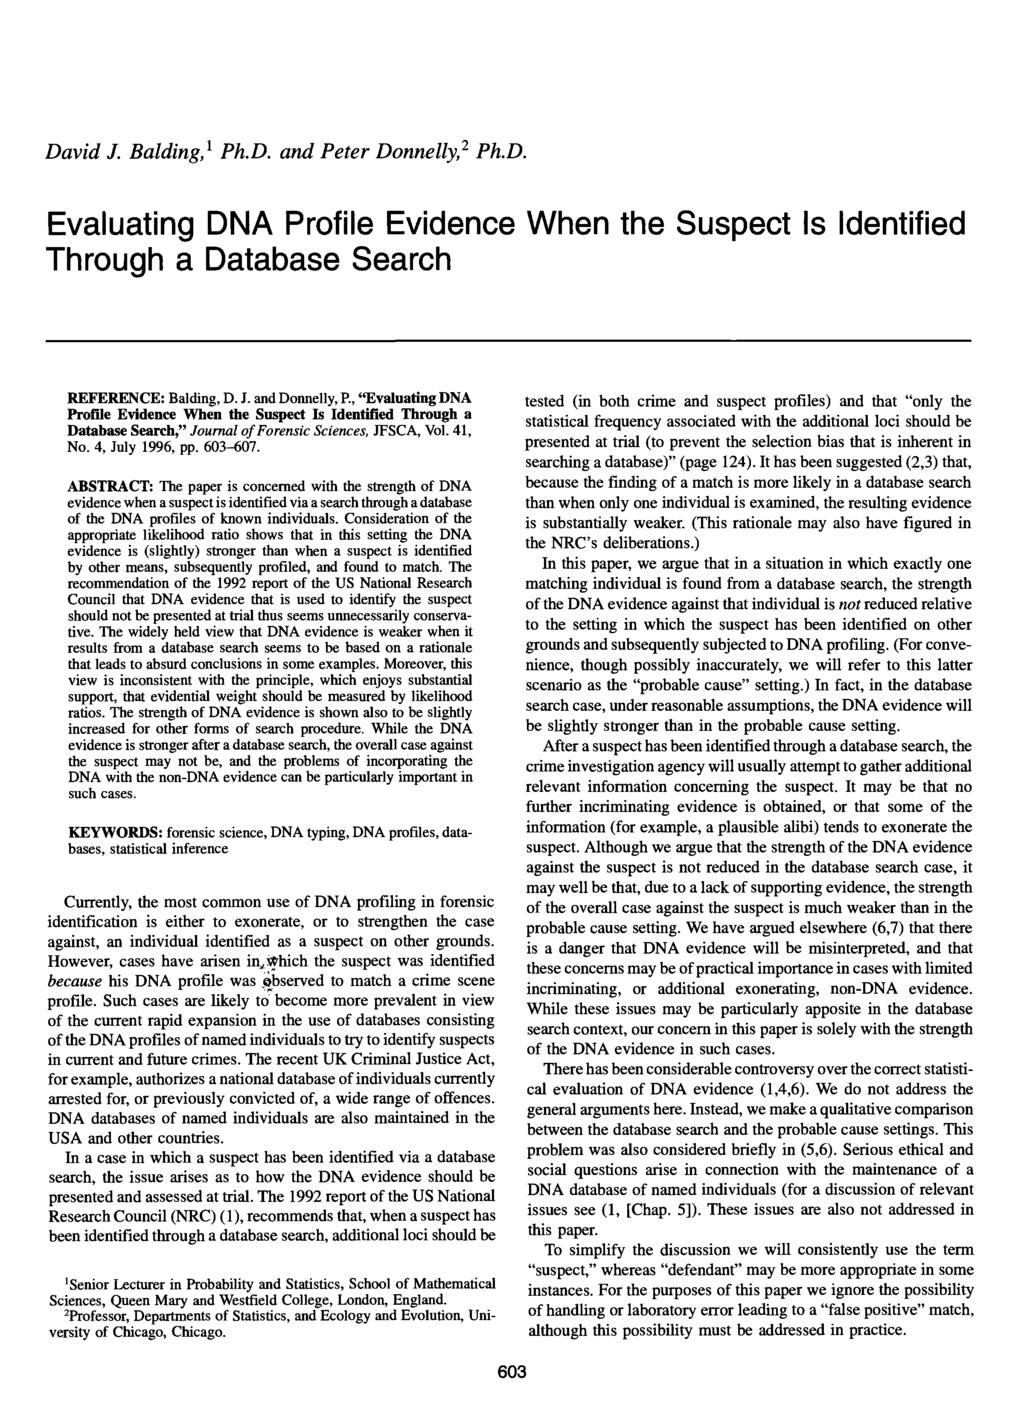 David J. Balding, t Ph.D. and Peter Donnelly, 2 Ph.D. Evaluating DNA Profile Evidence When the Suspect Is Identified Through a Database Search REFERENCE: Balding, D. J. and Donnelly, E, "Evaluating DNA Profile Evidence When the Suspect Is Identified Through a Database Search," Journal of Forensic Sciences, JFSCA, Vol.